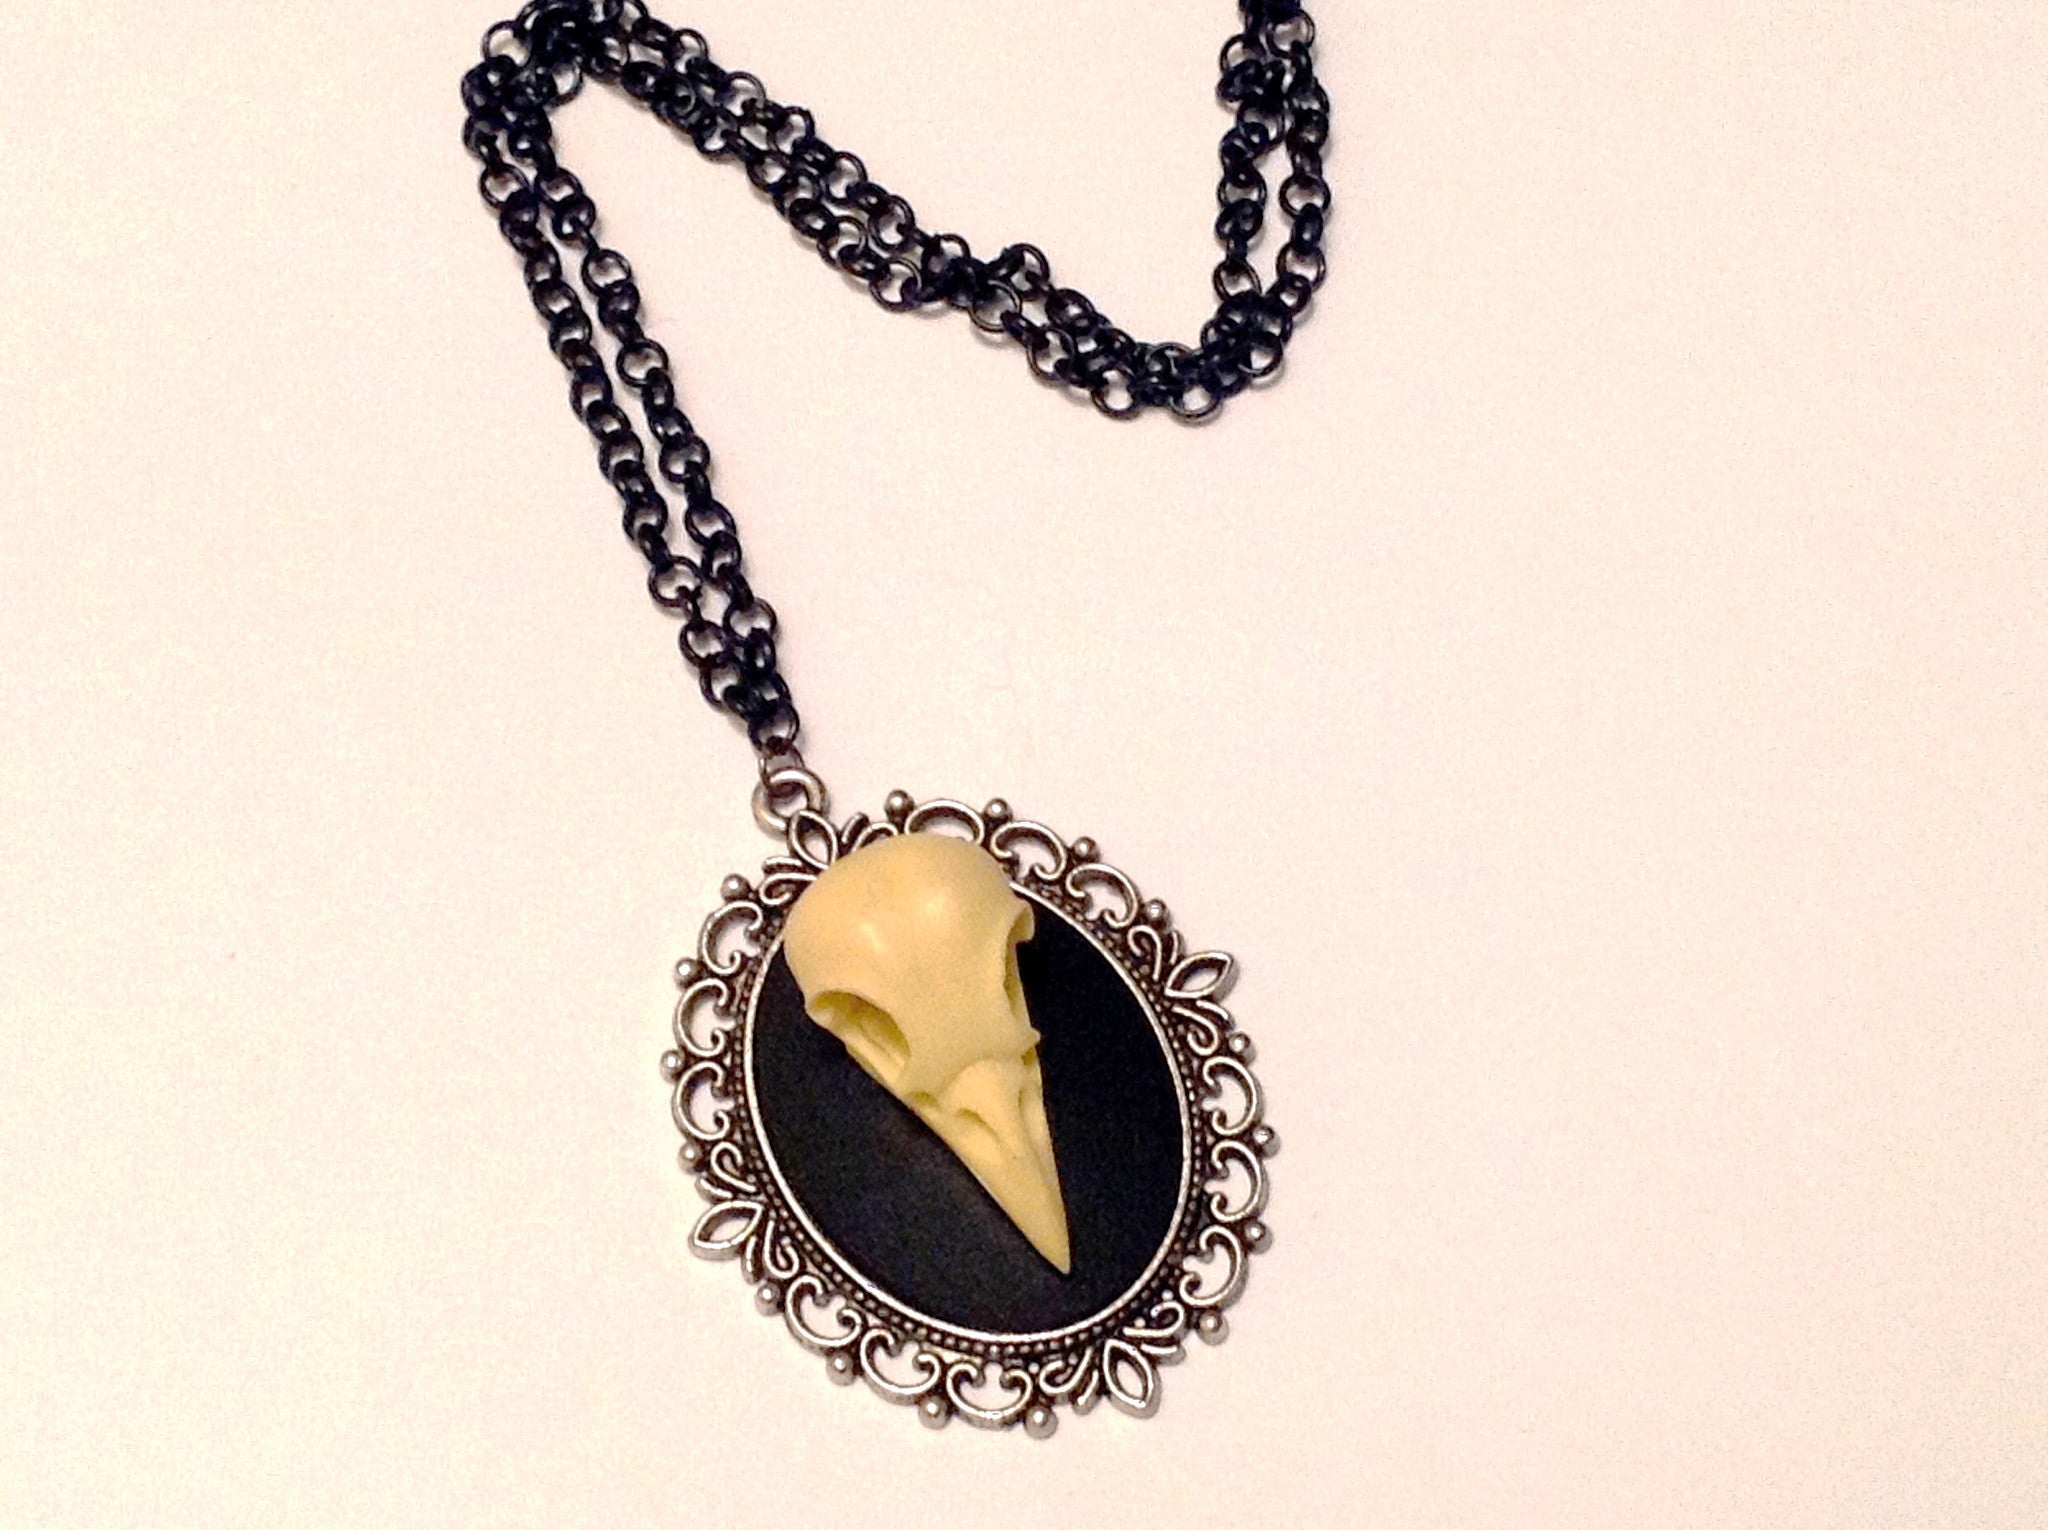 Crow Skull Cameo Necklace